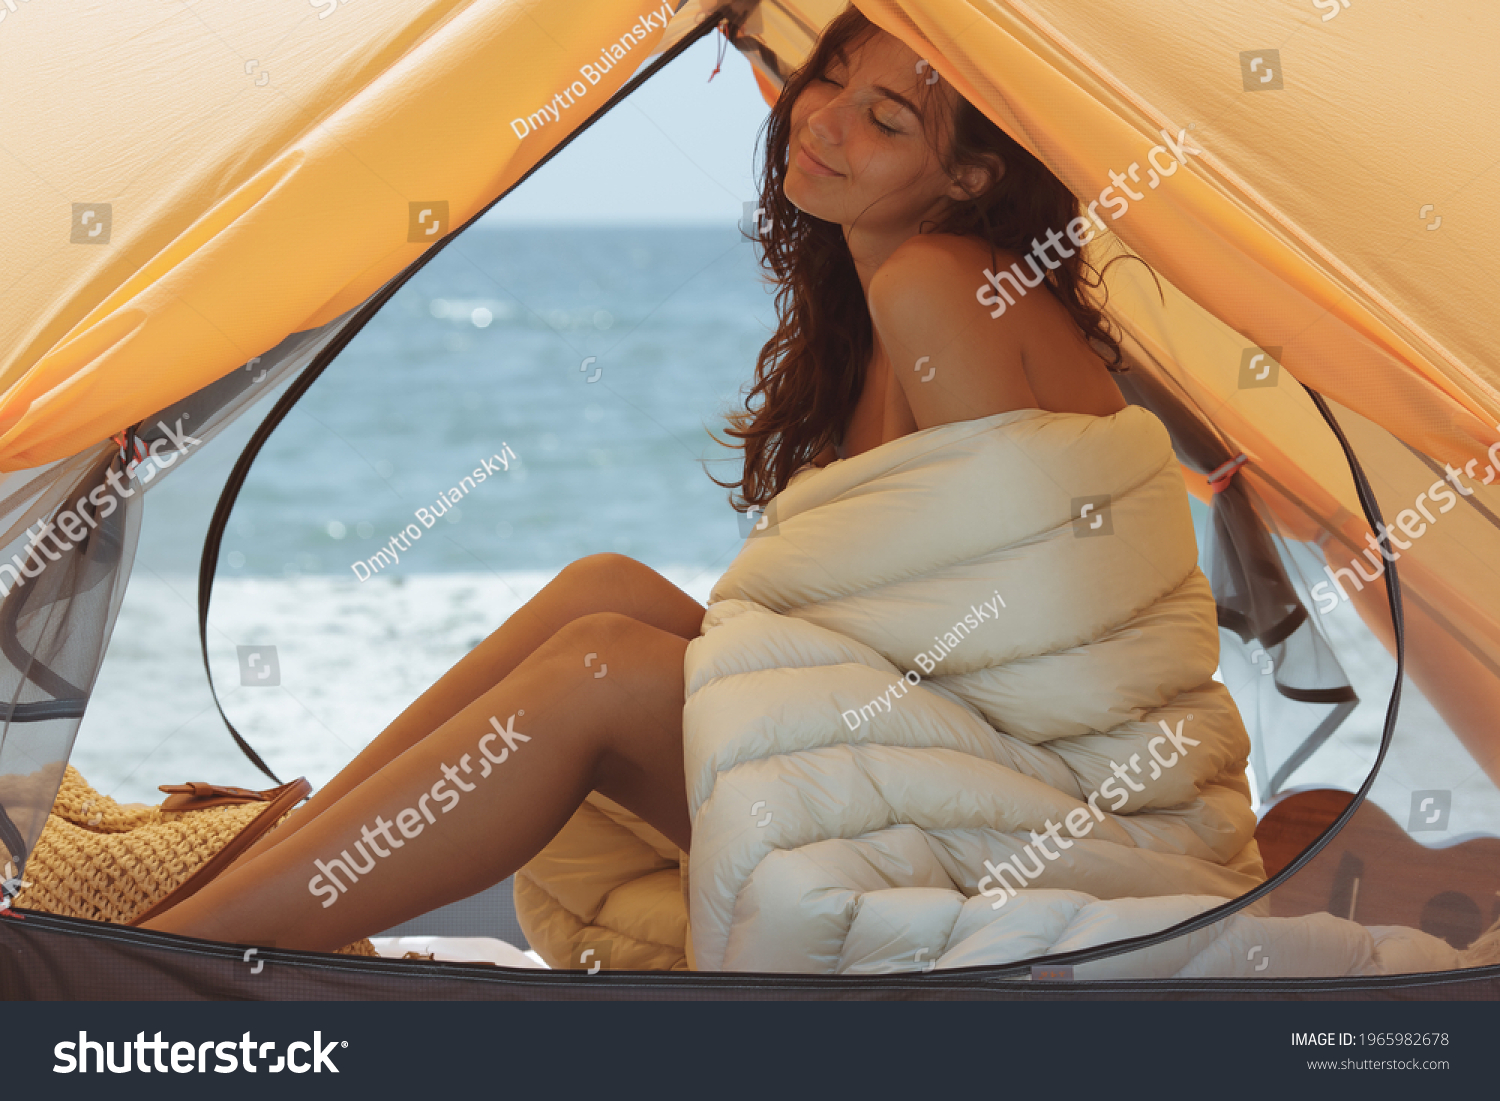 Naked Woman On Beach Tent Stock Photo 1965982678 Shutterstock